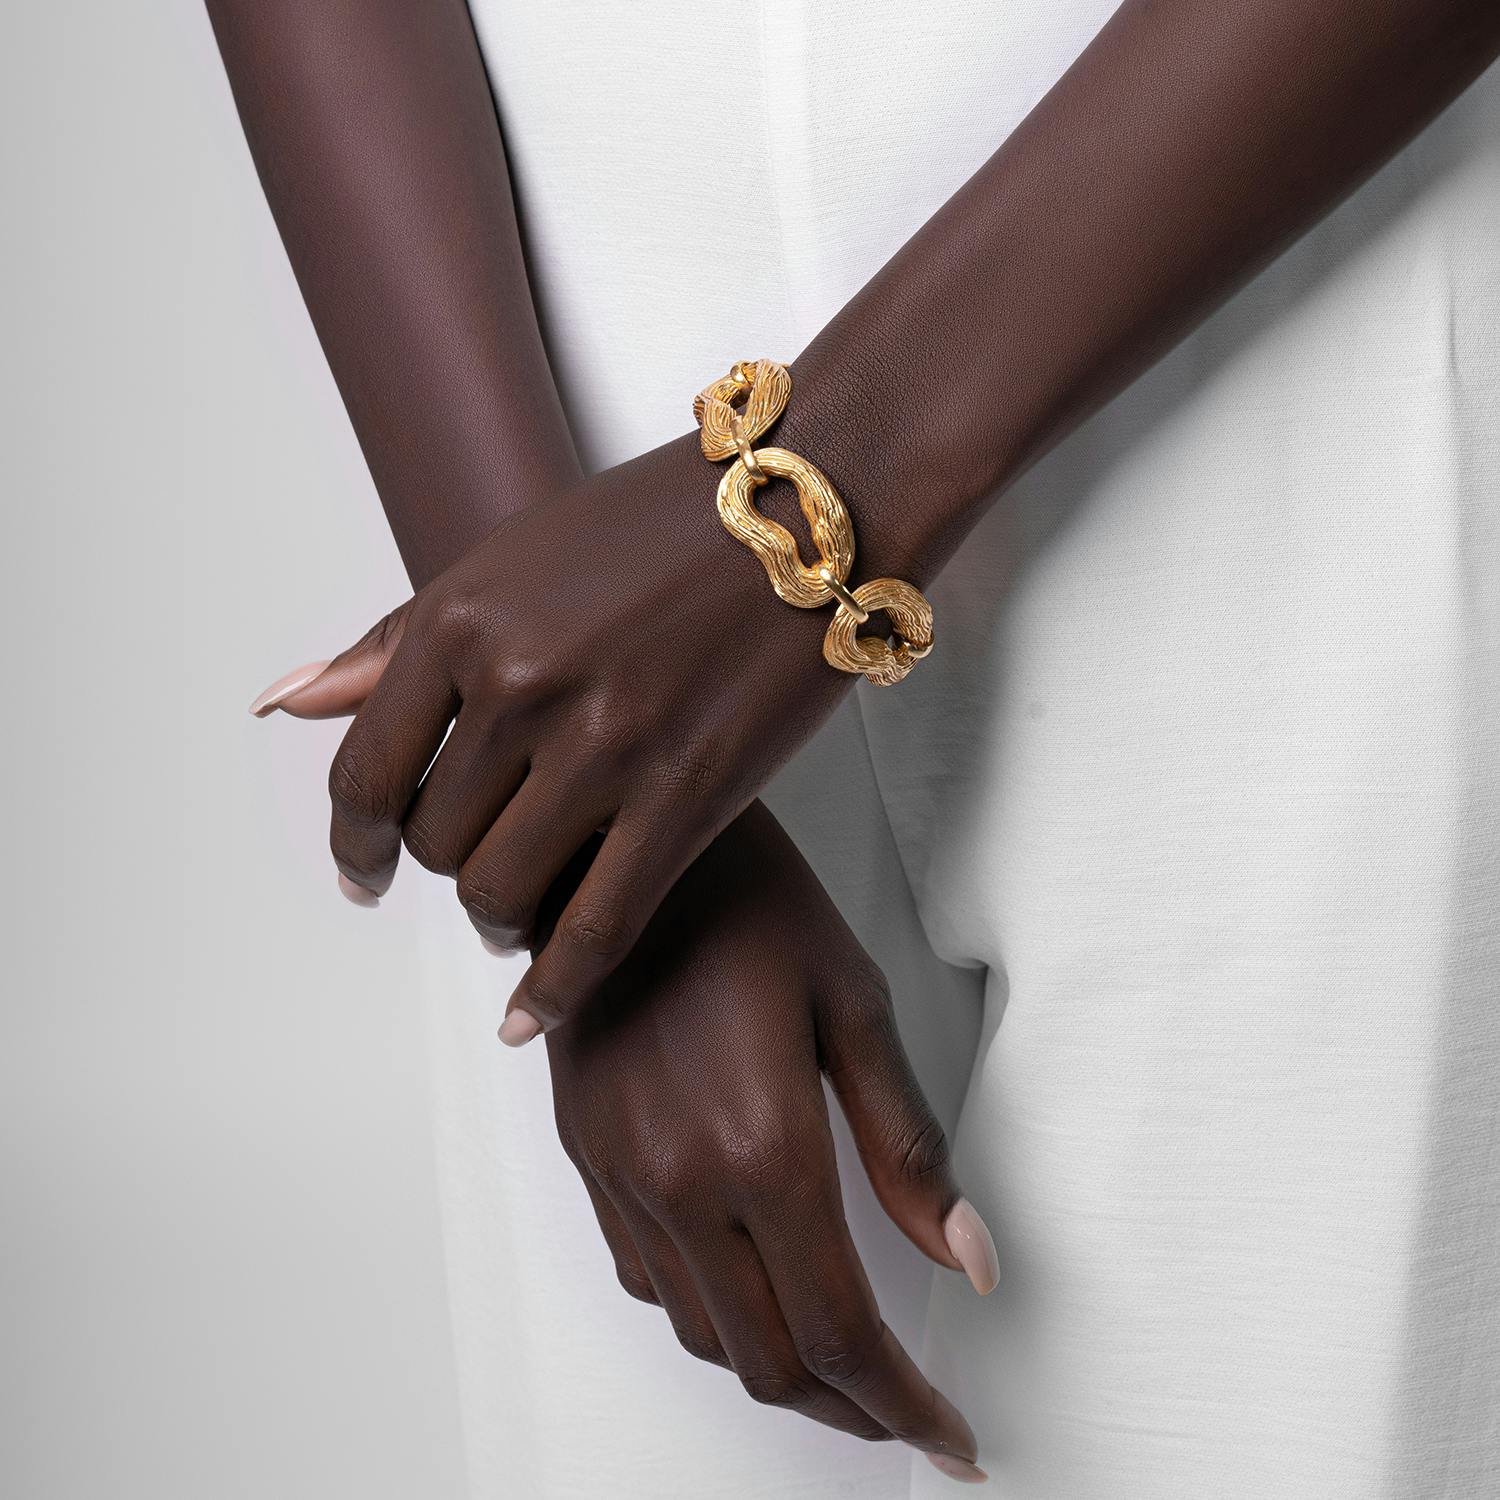 SYLVIE LINK BRACELET GOLD TONE, a product by Equiivalence